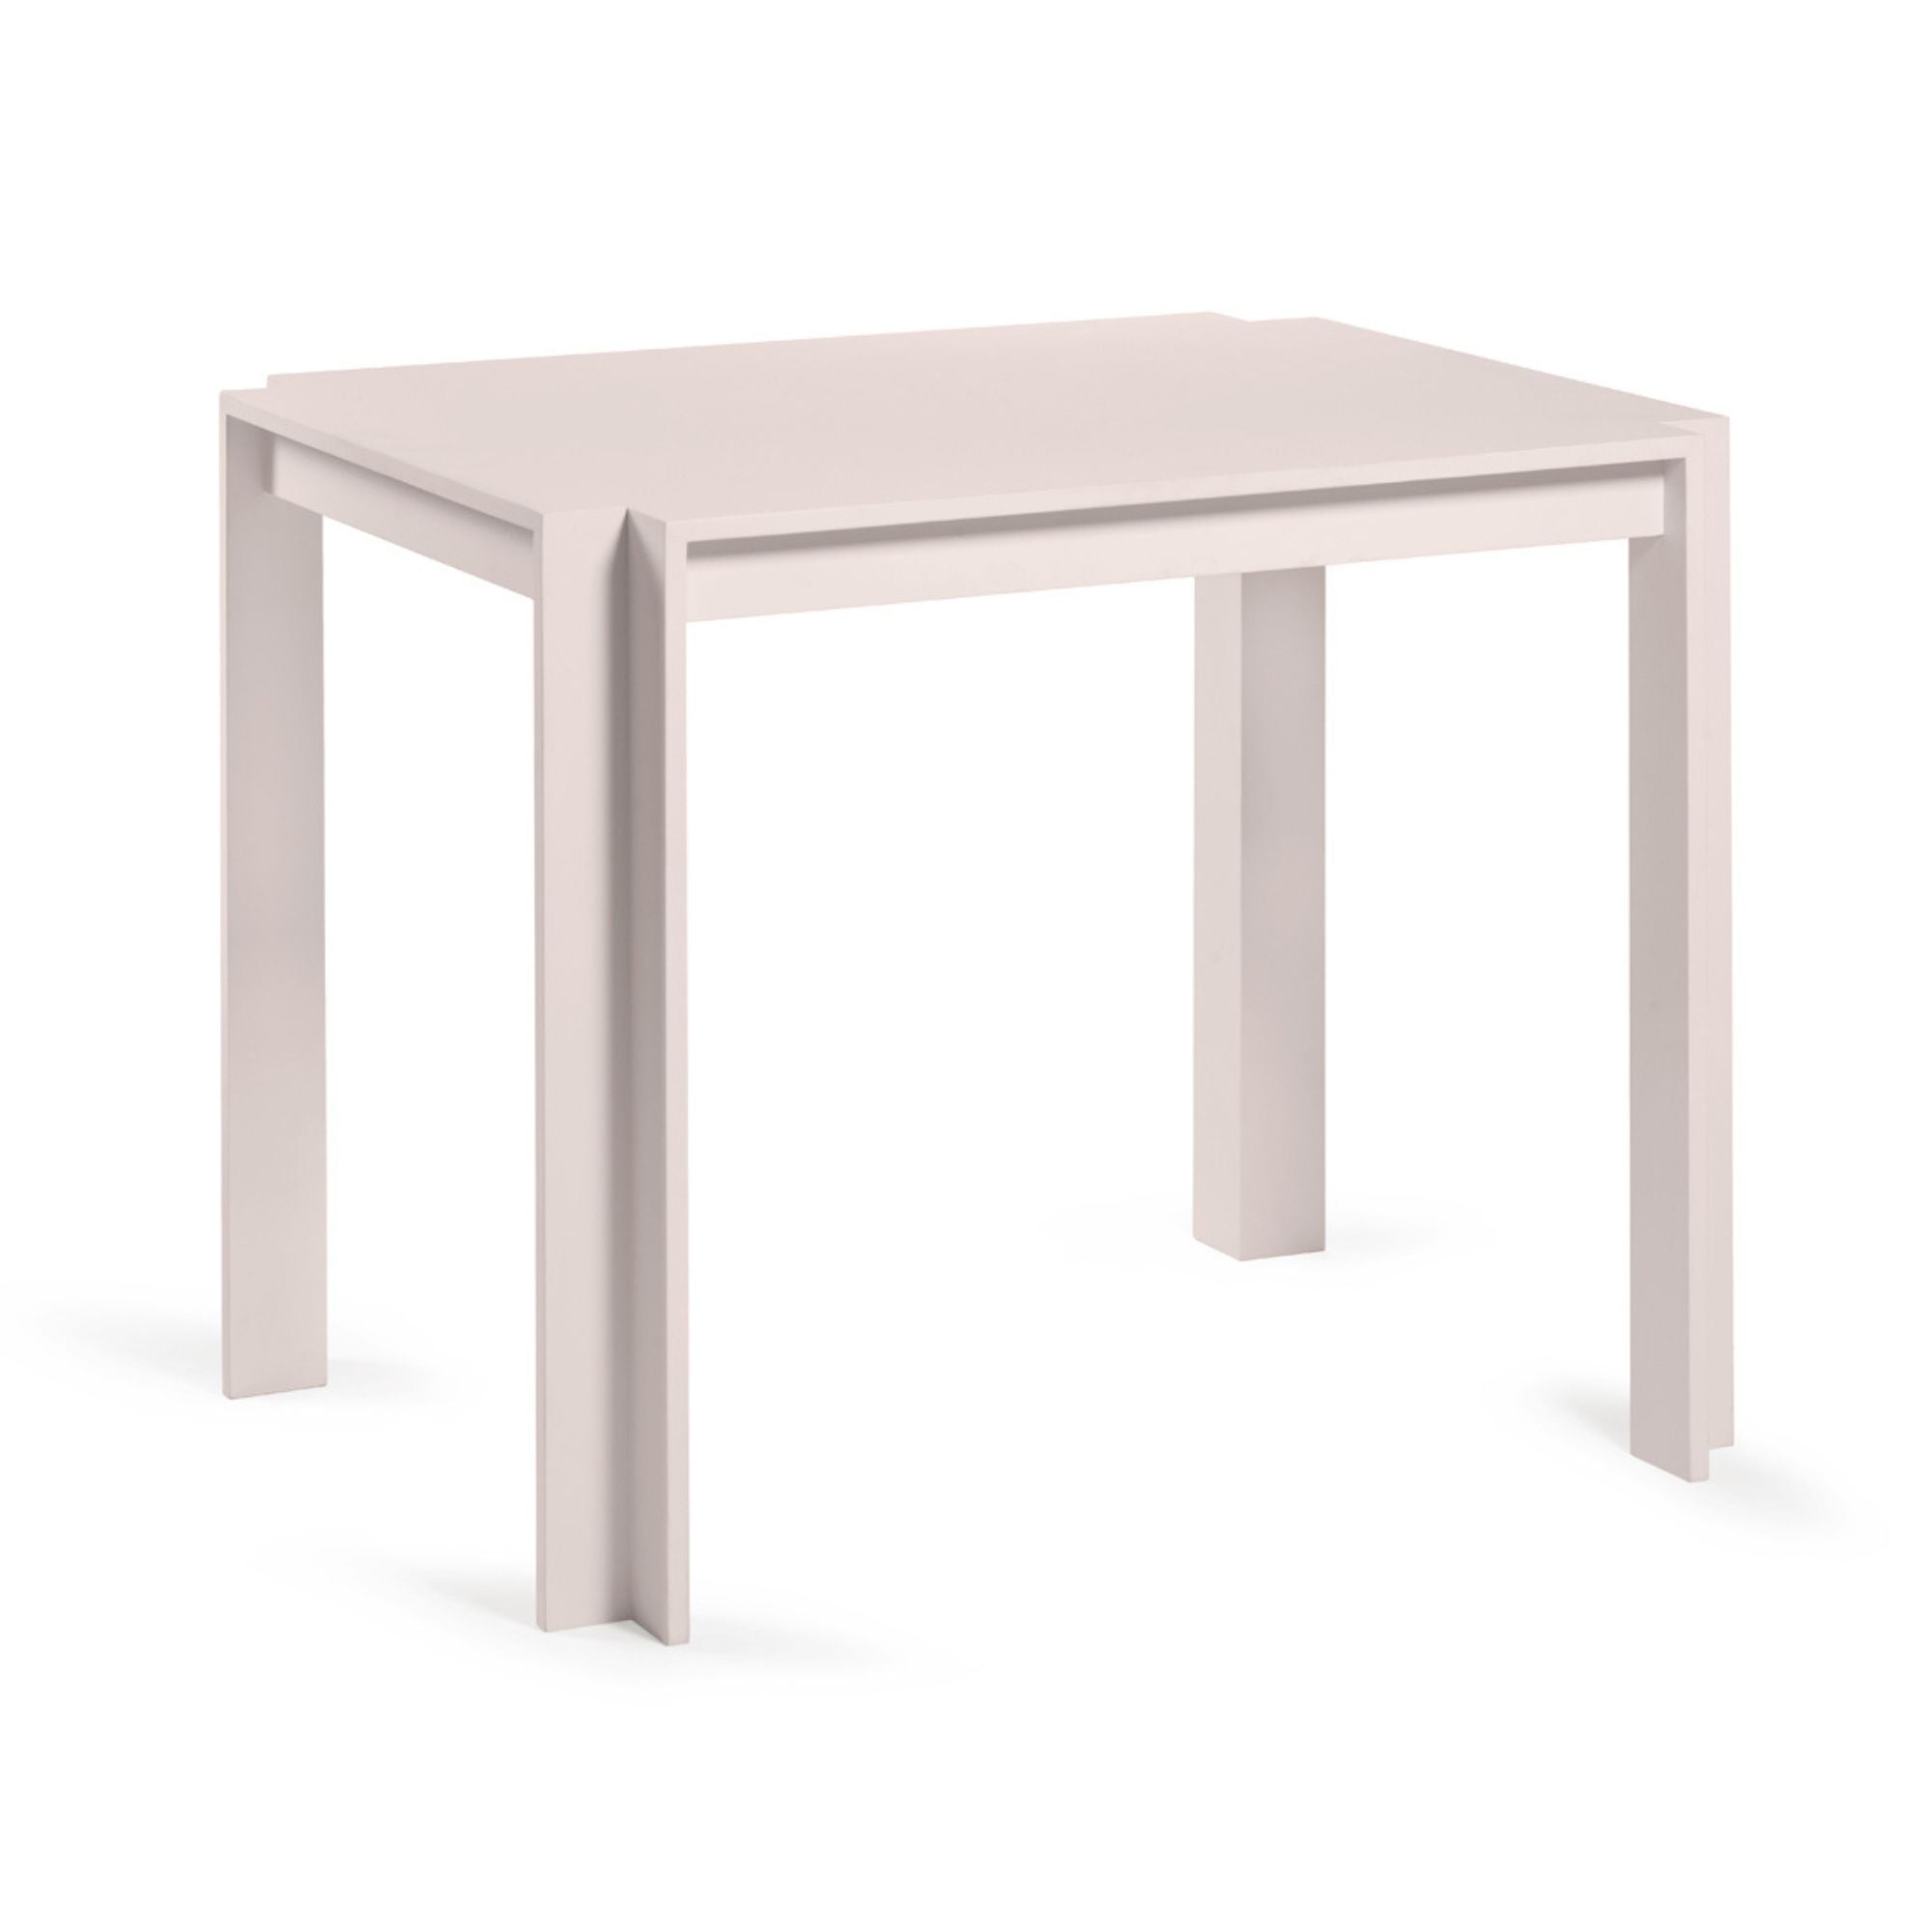 Cora Table Dining Table Ann Demeulemeester